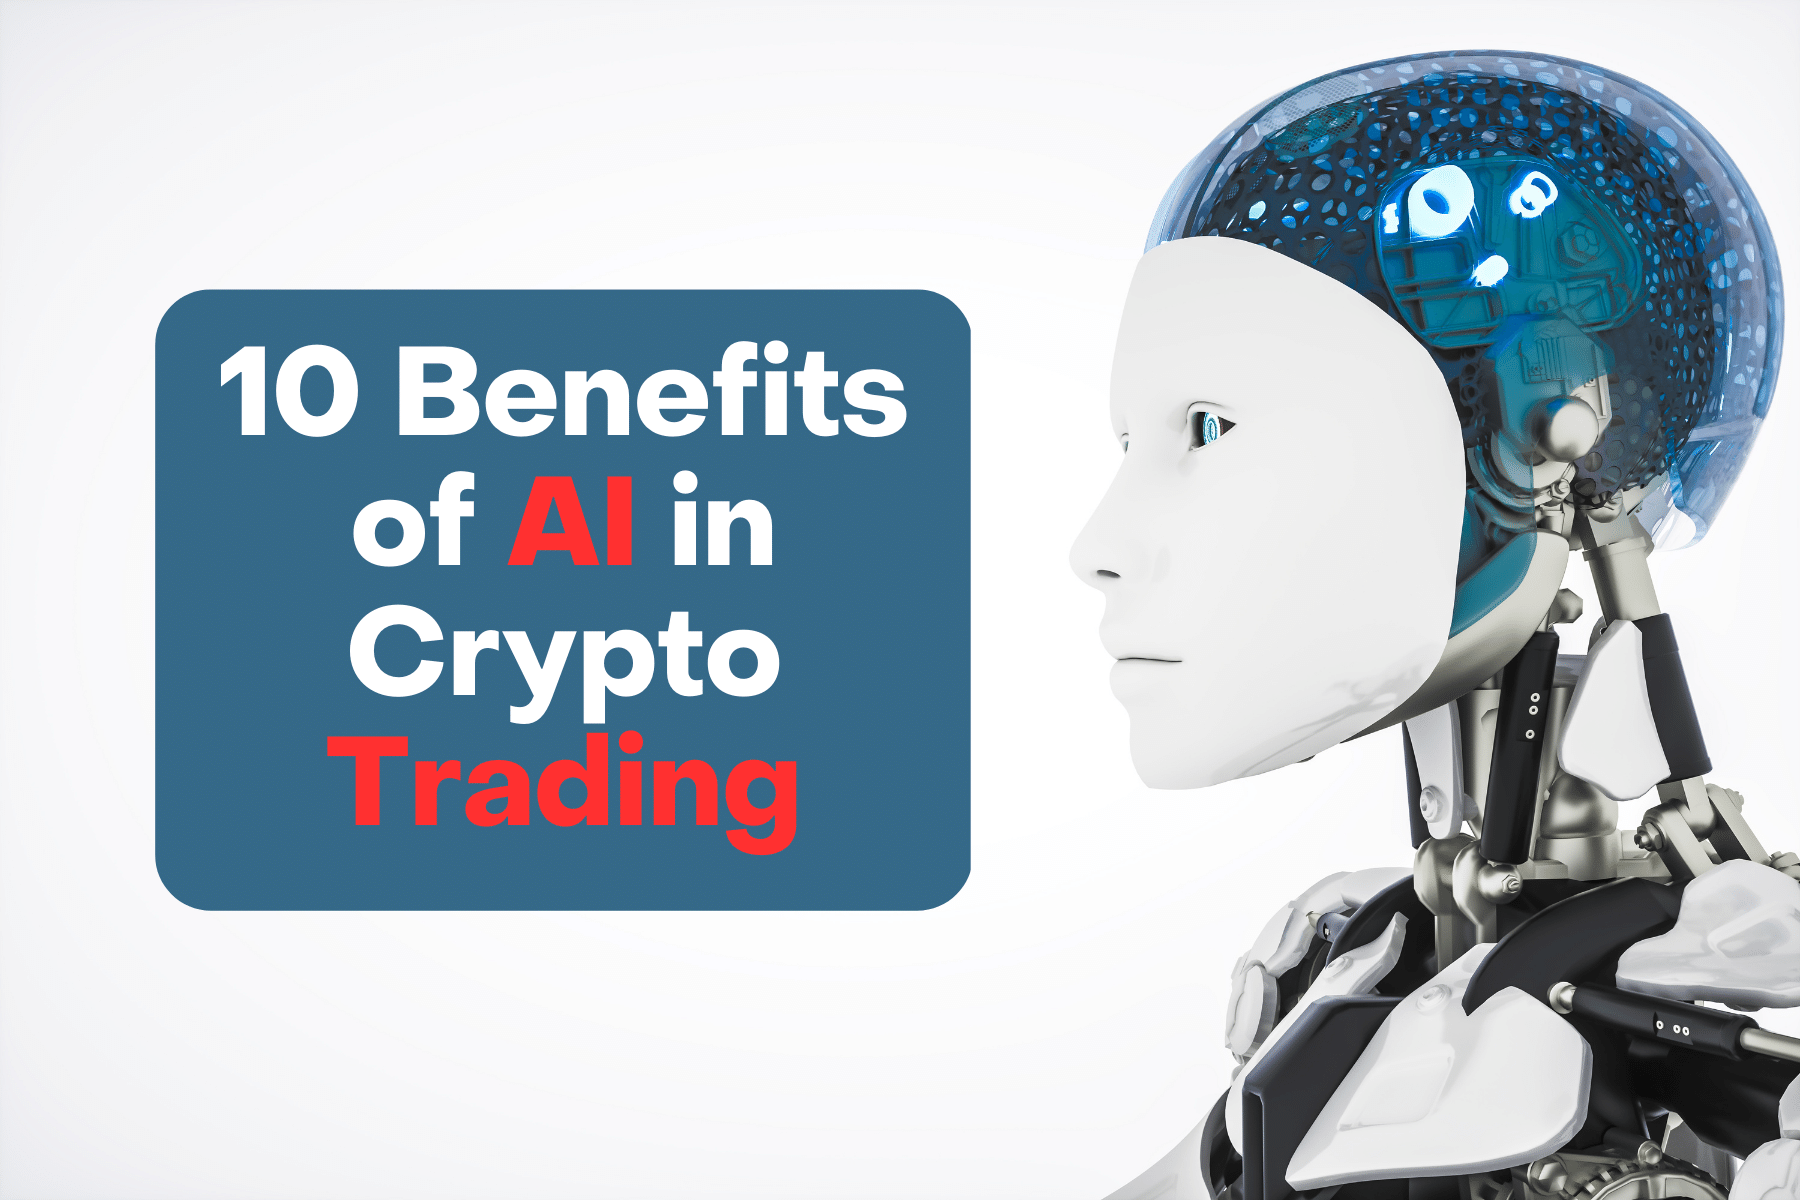 10 Benefits of AI in Crypto Trading